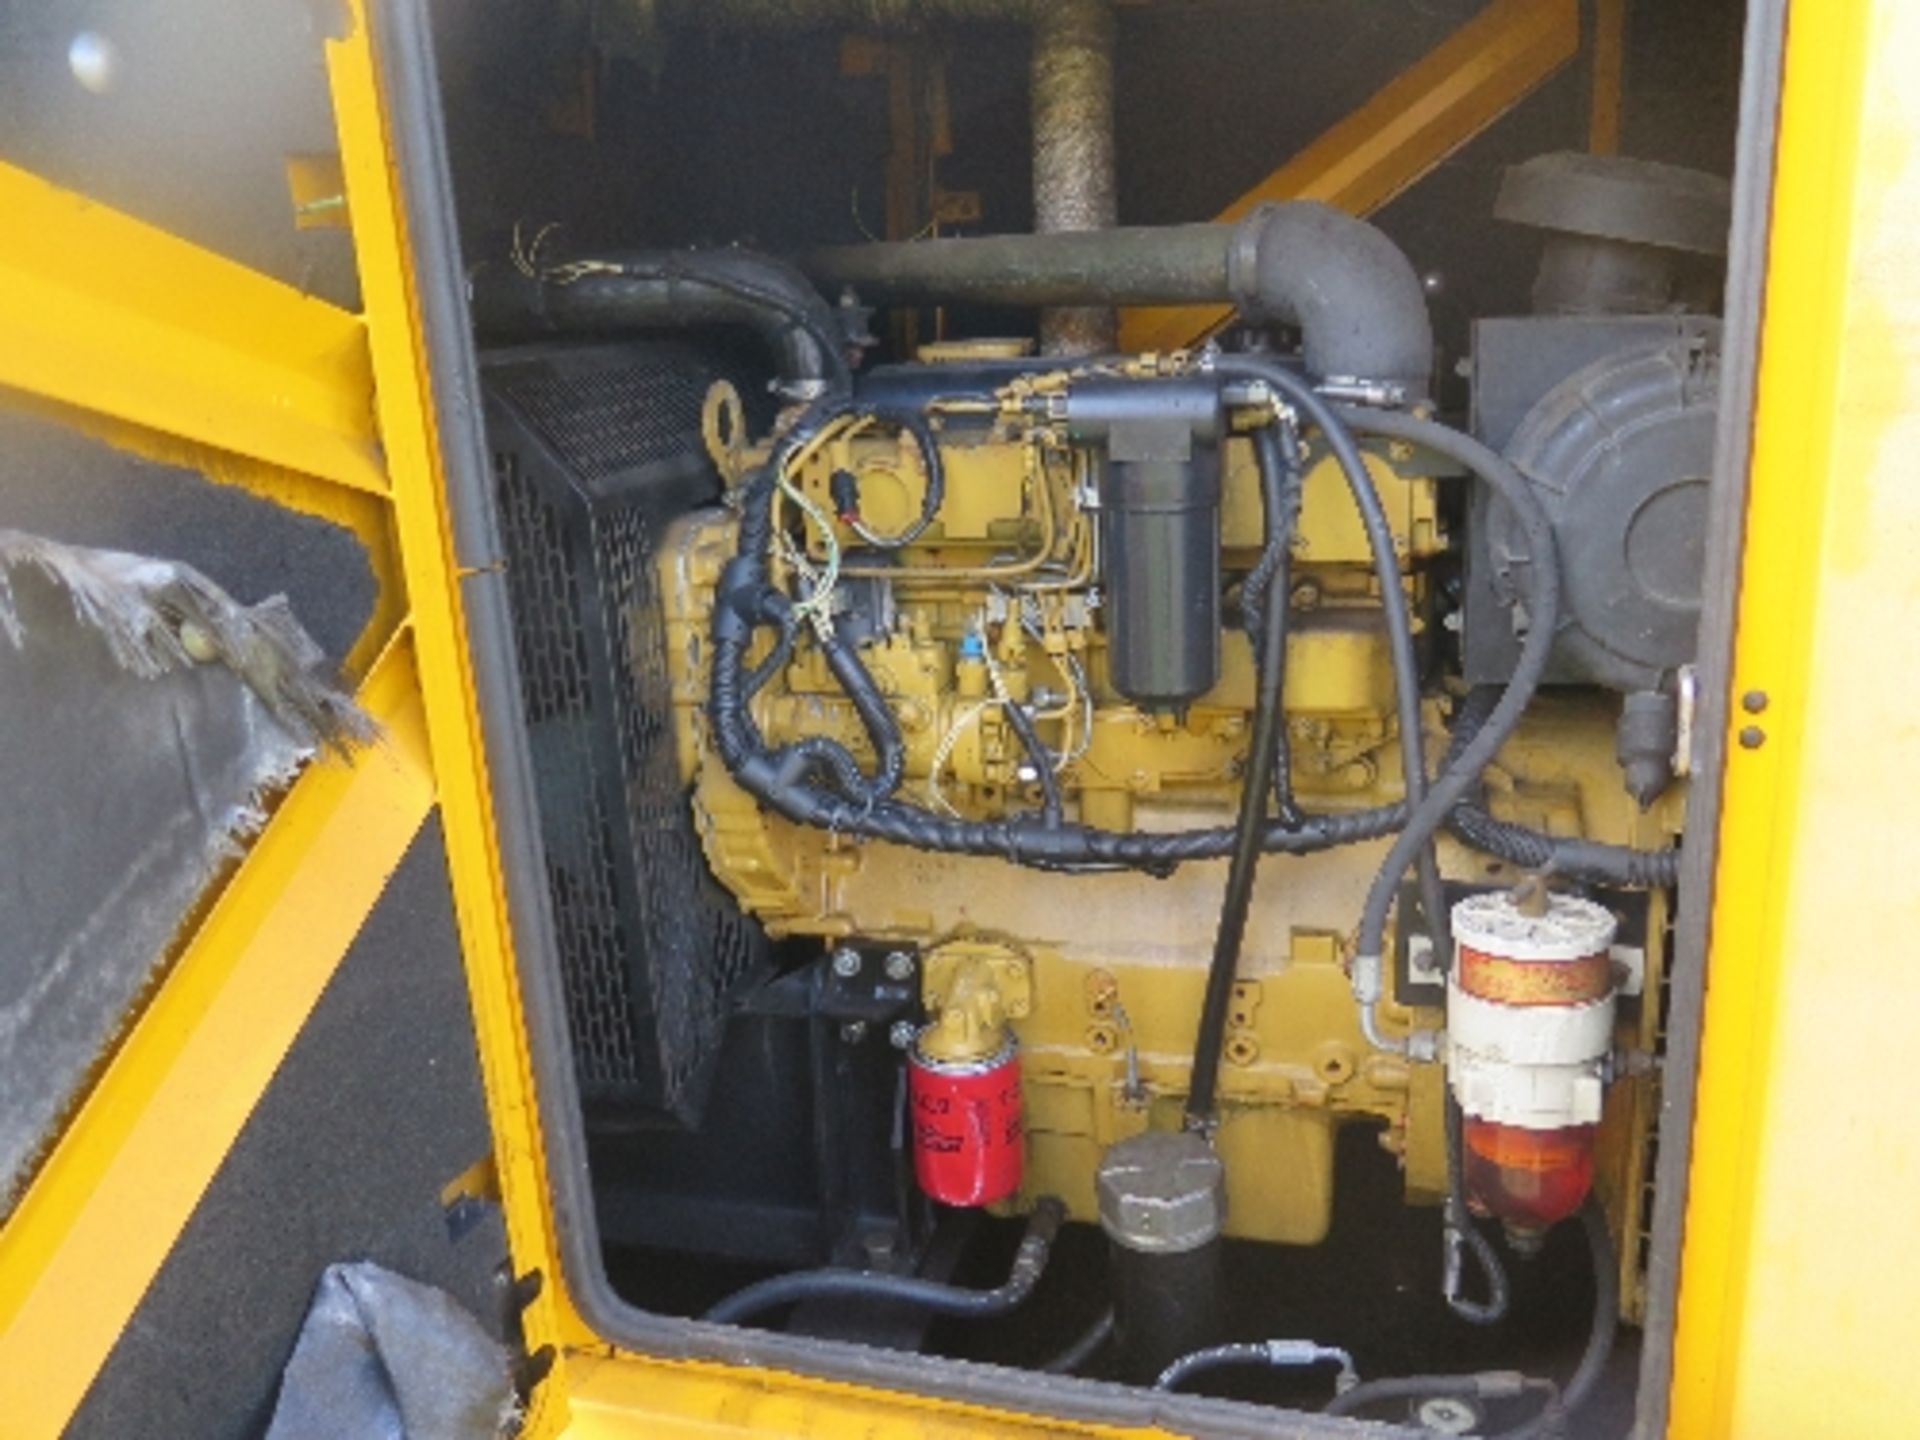 Caterpillar XQE100 generator 15066 hrs 158066
PERKINS - RUNS AND MAKES POWER
ALL LOTS are SOLD - Image 3 of 7